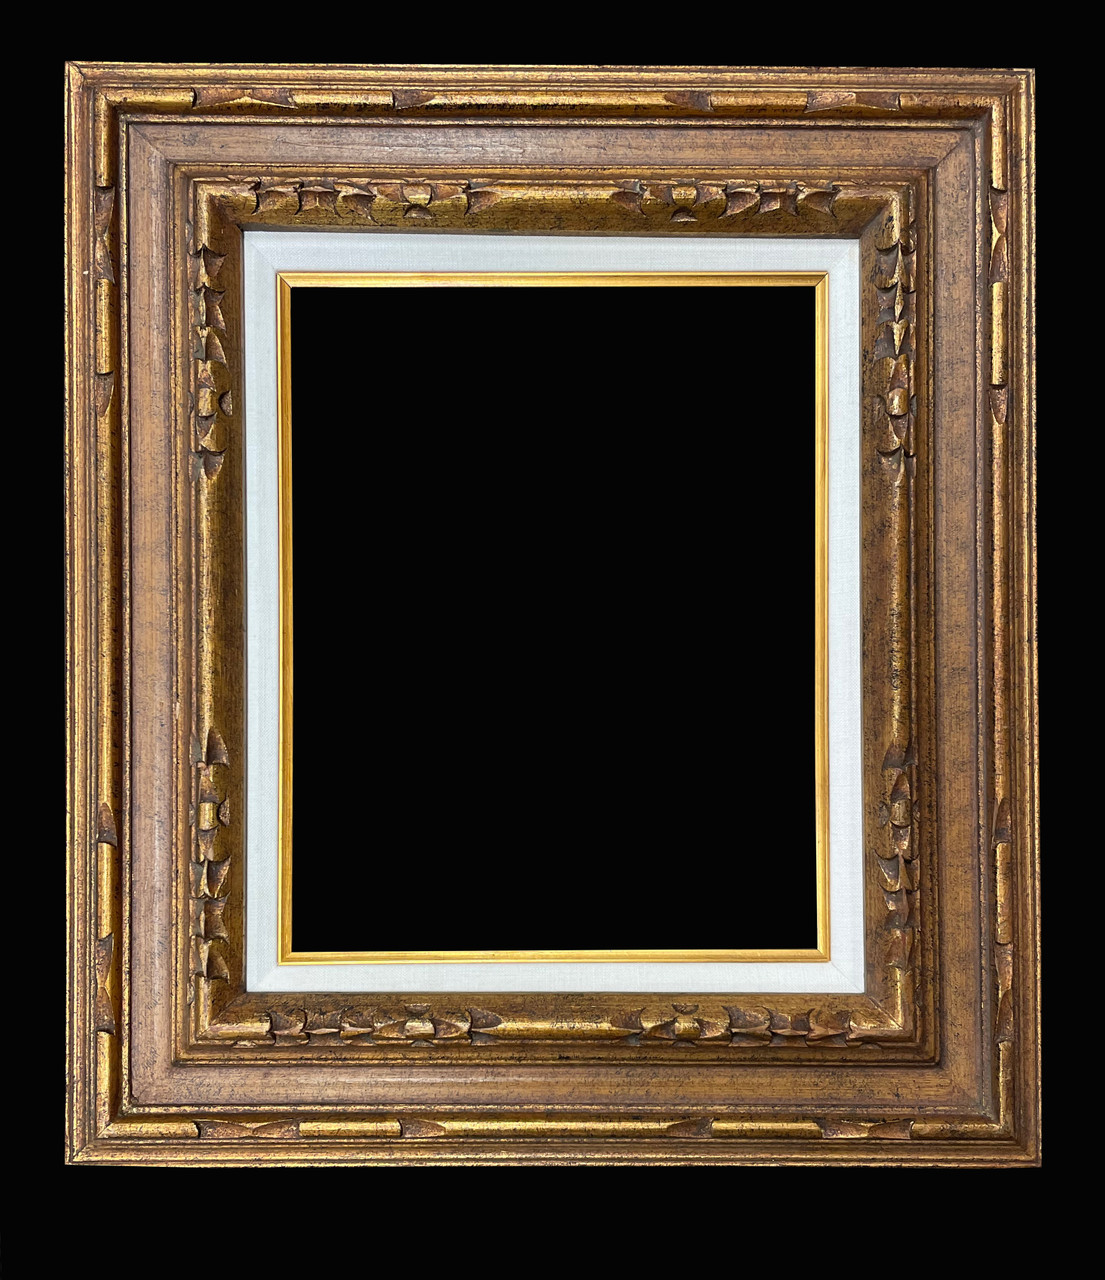 CustomPictureFrames.com 30x30 Frame Black & Gold Solid Wood Picture Frame  Width 1.125 Inches